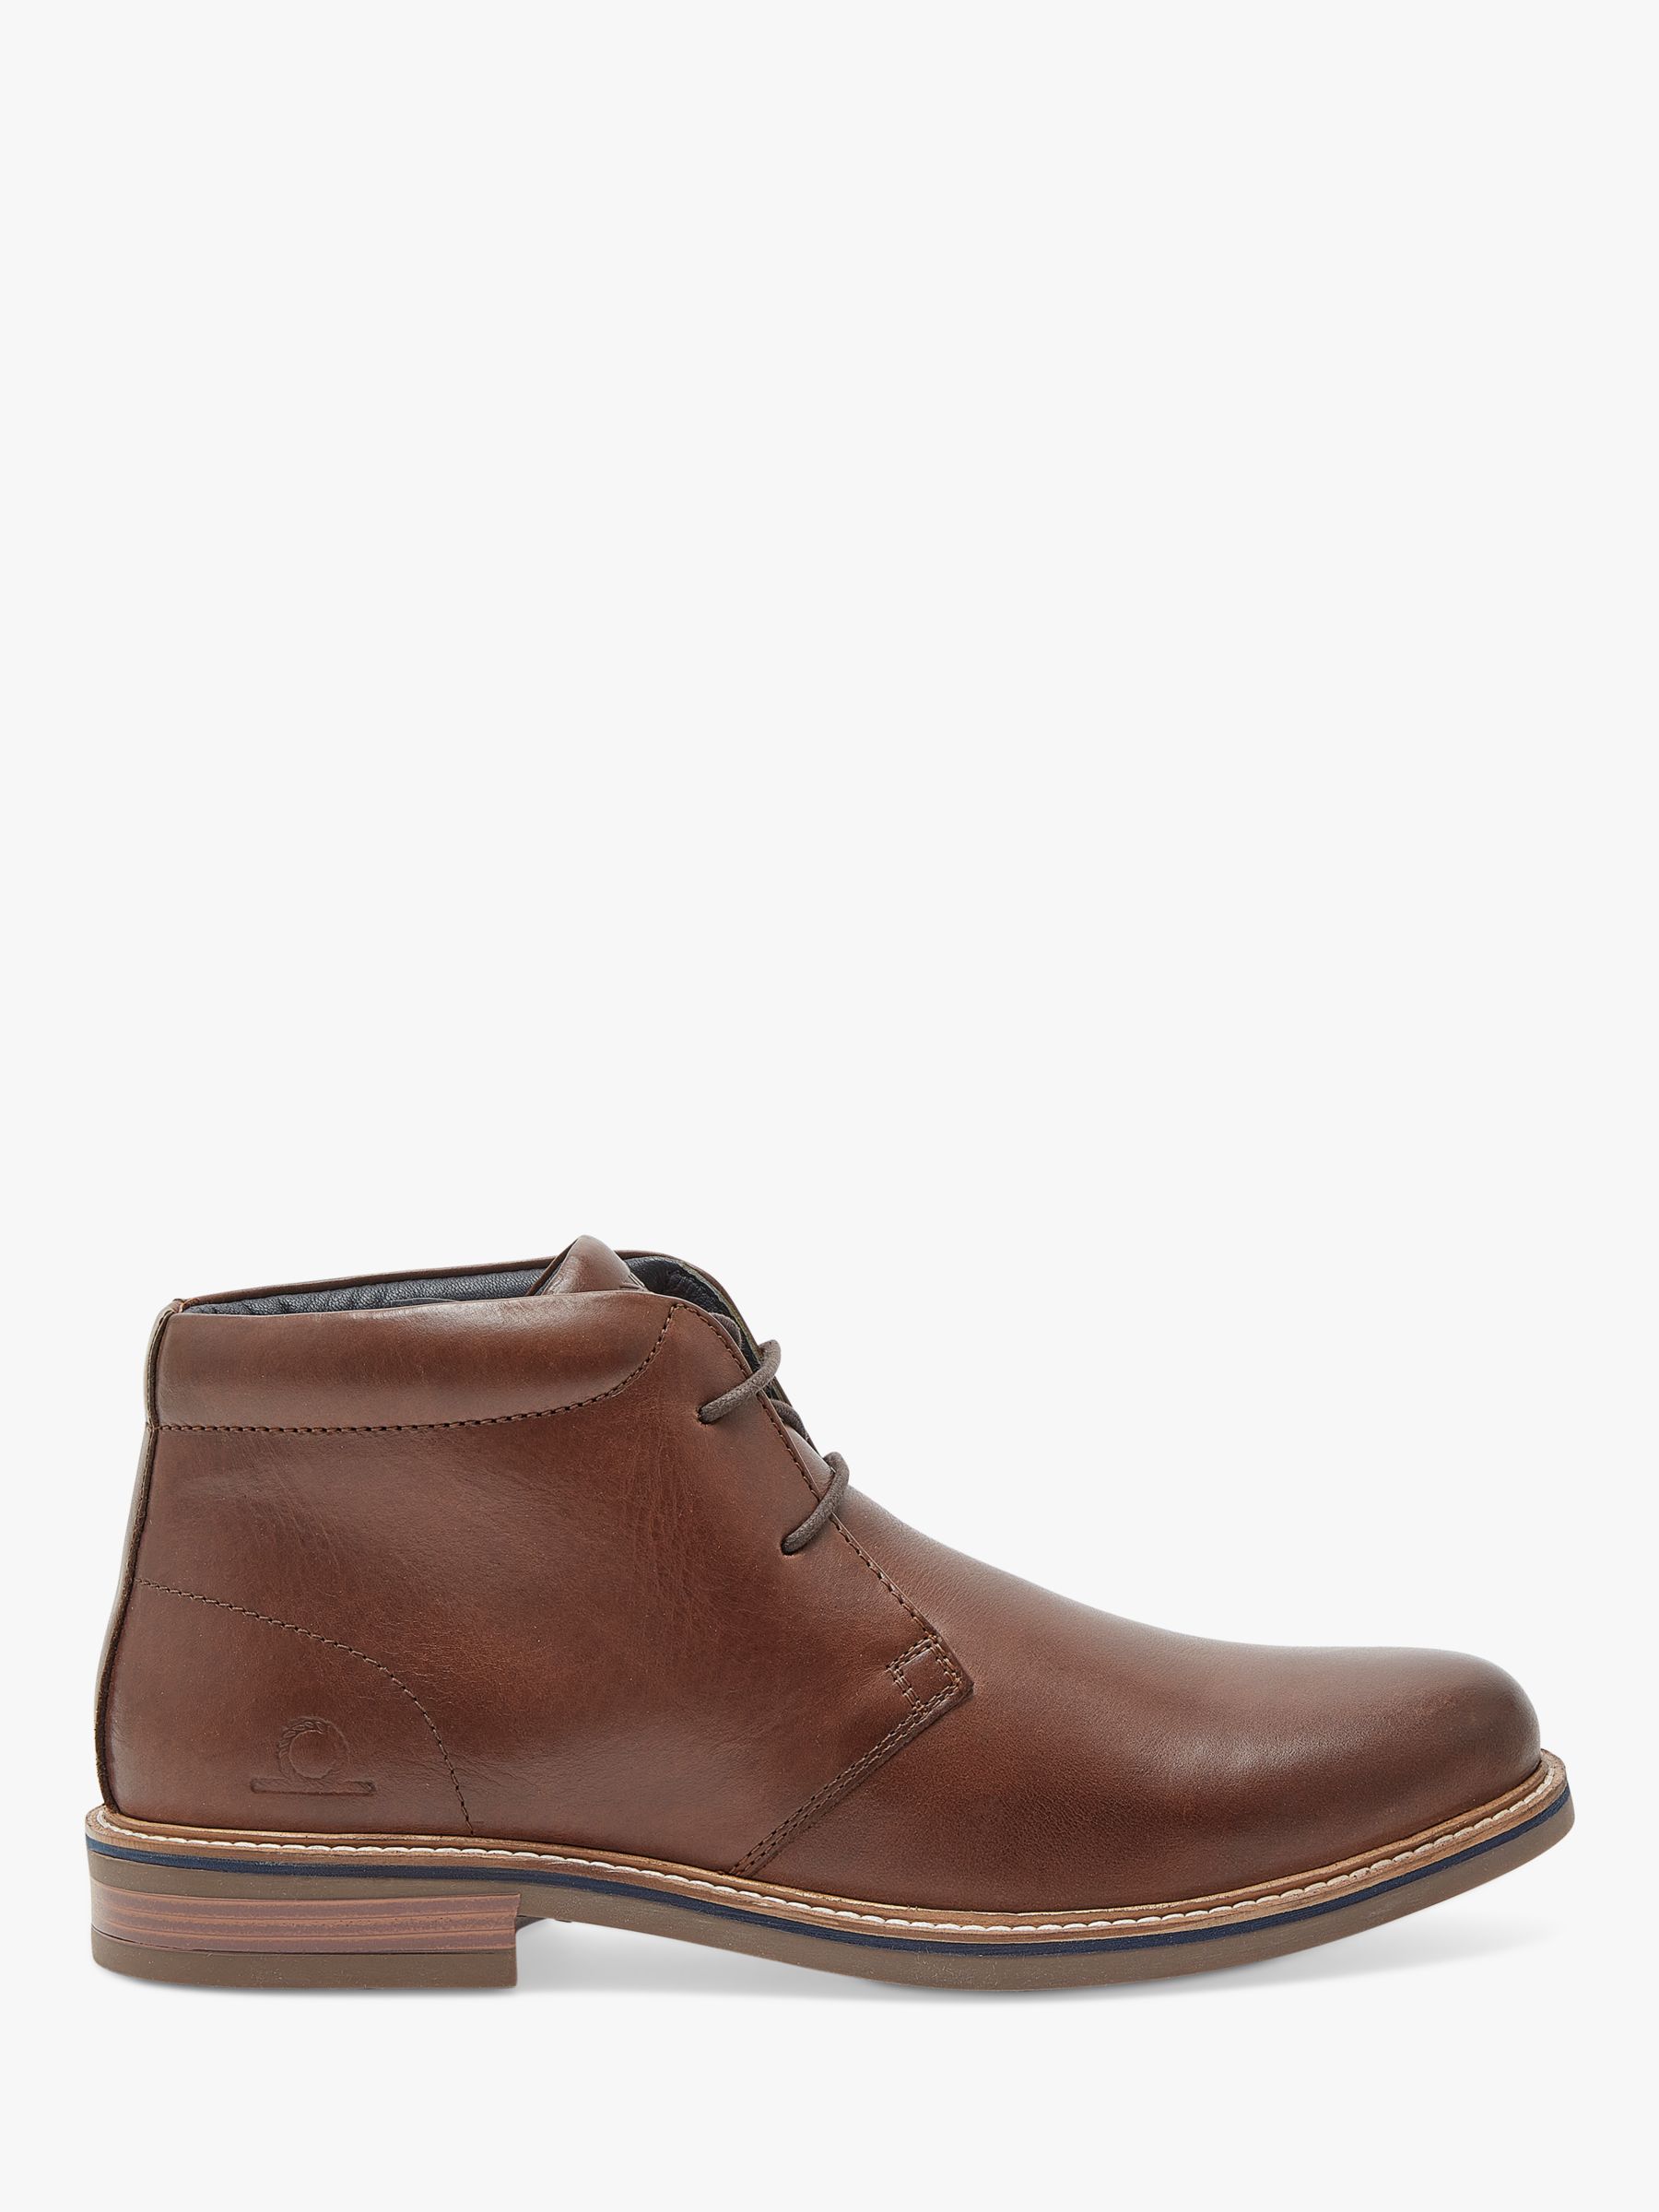 Chatham Buckland Leather Chukka Boots, Dark Brown at John Lewis & Partners